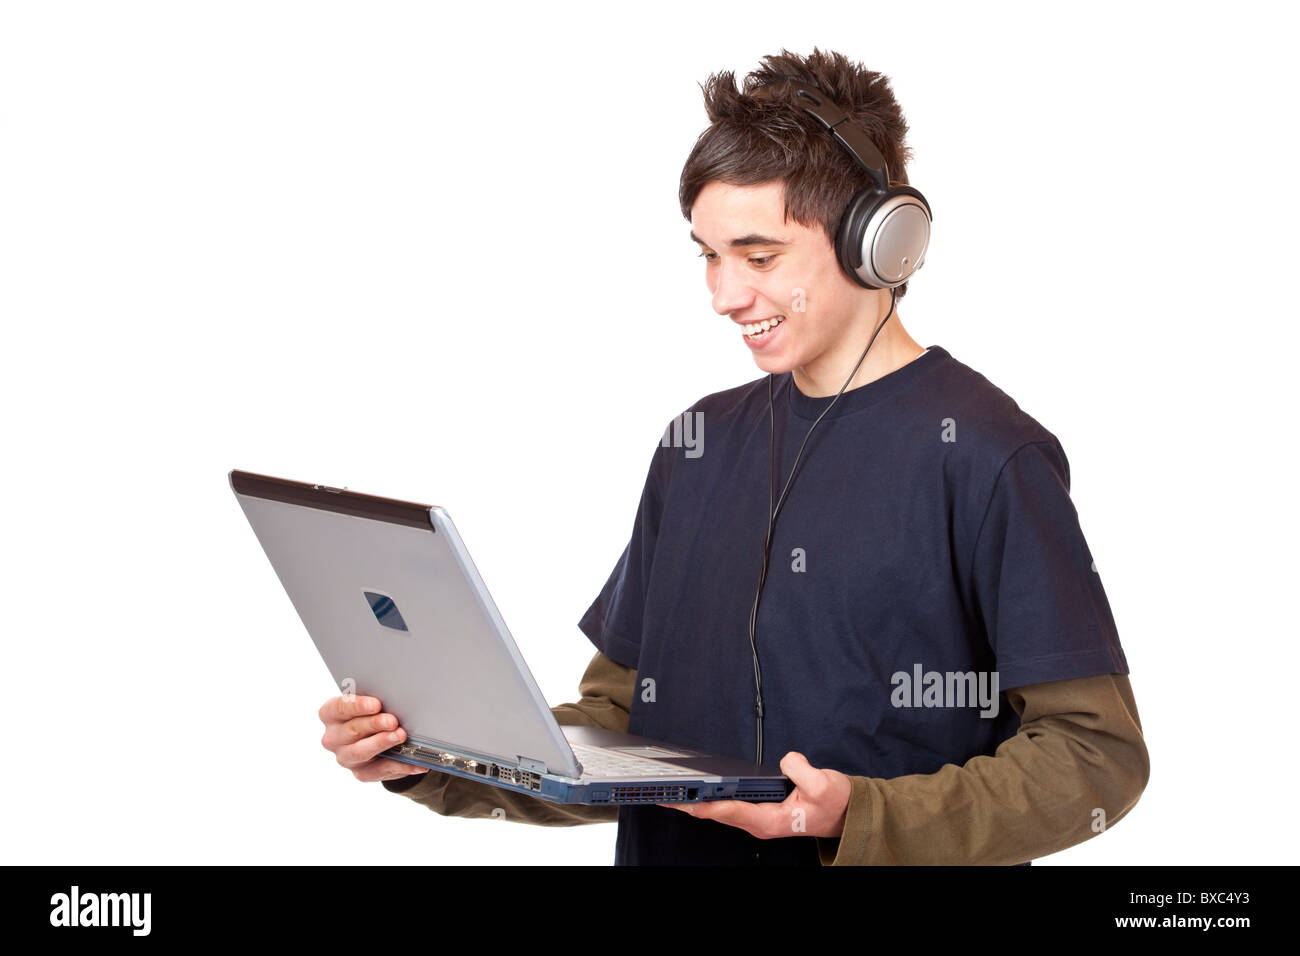 Teenager with headset makes internet mp3 music download at computer. Isolated on white background. Stock Photo